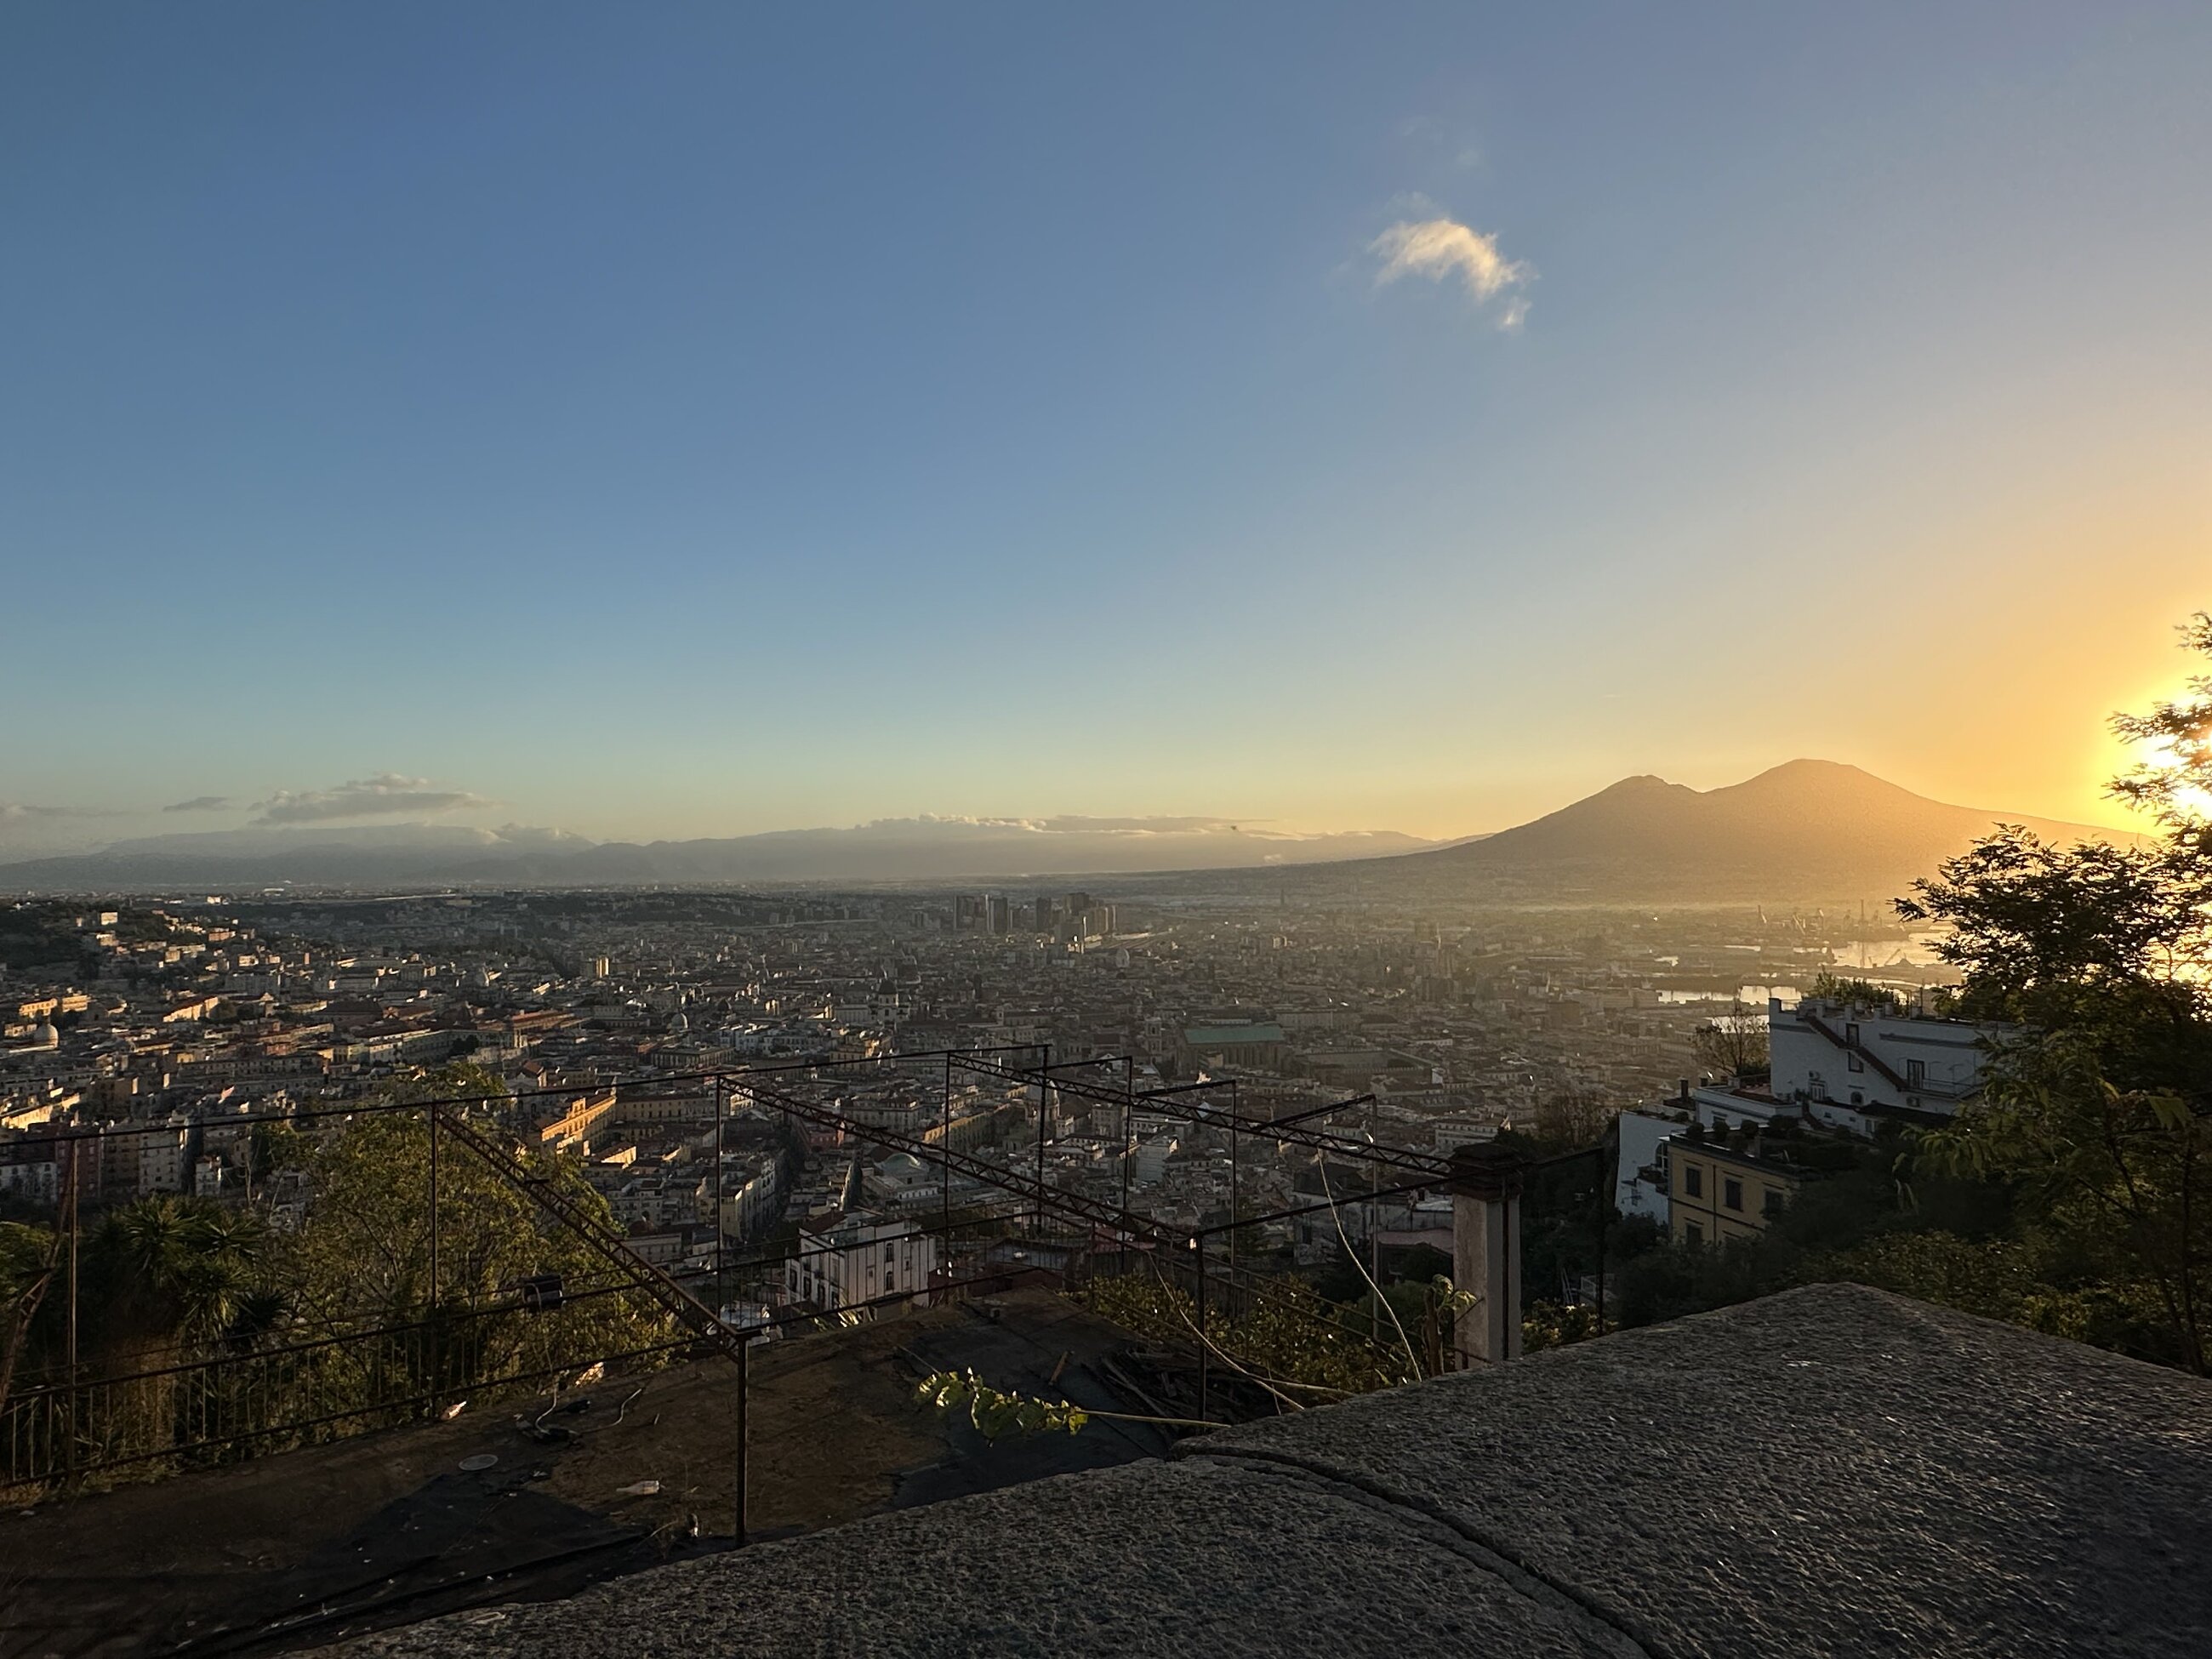 Sunrise from Castell Sant' Elmo with the Vesuvius